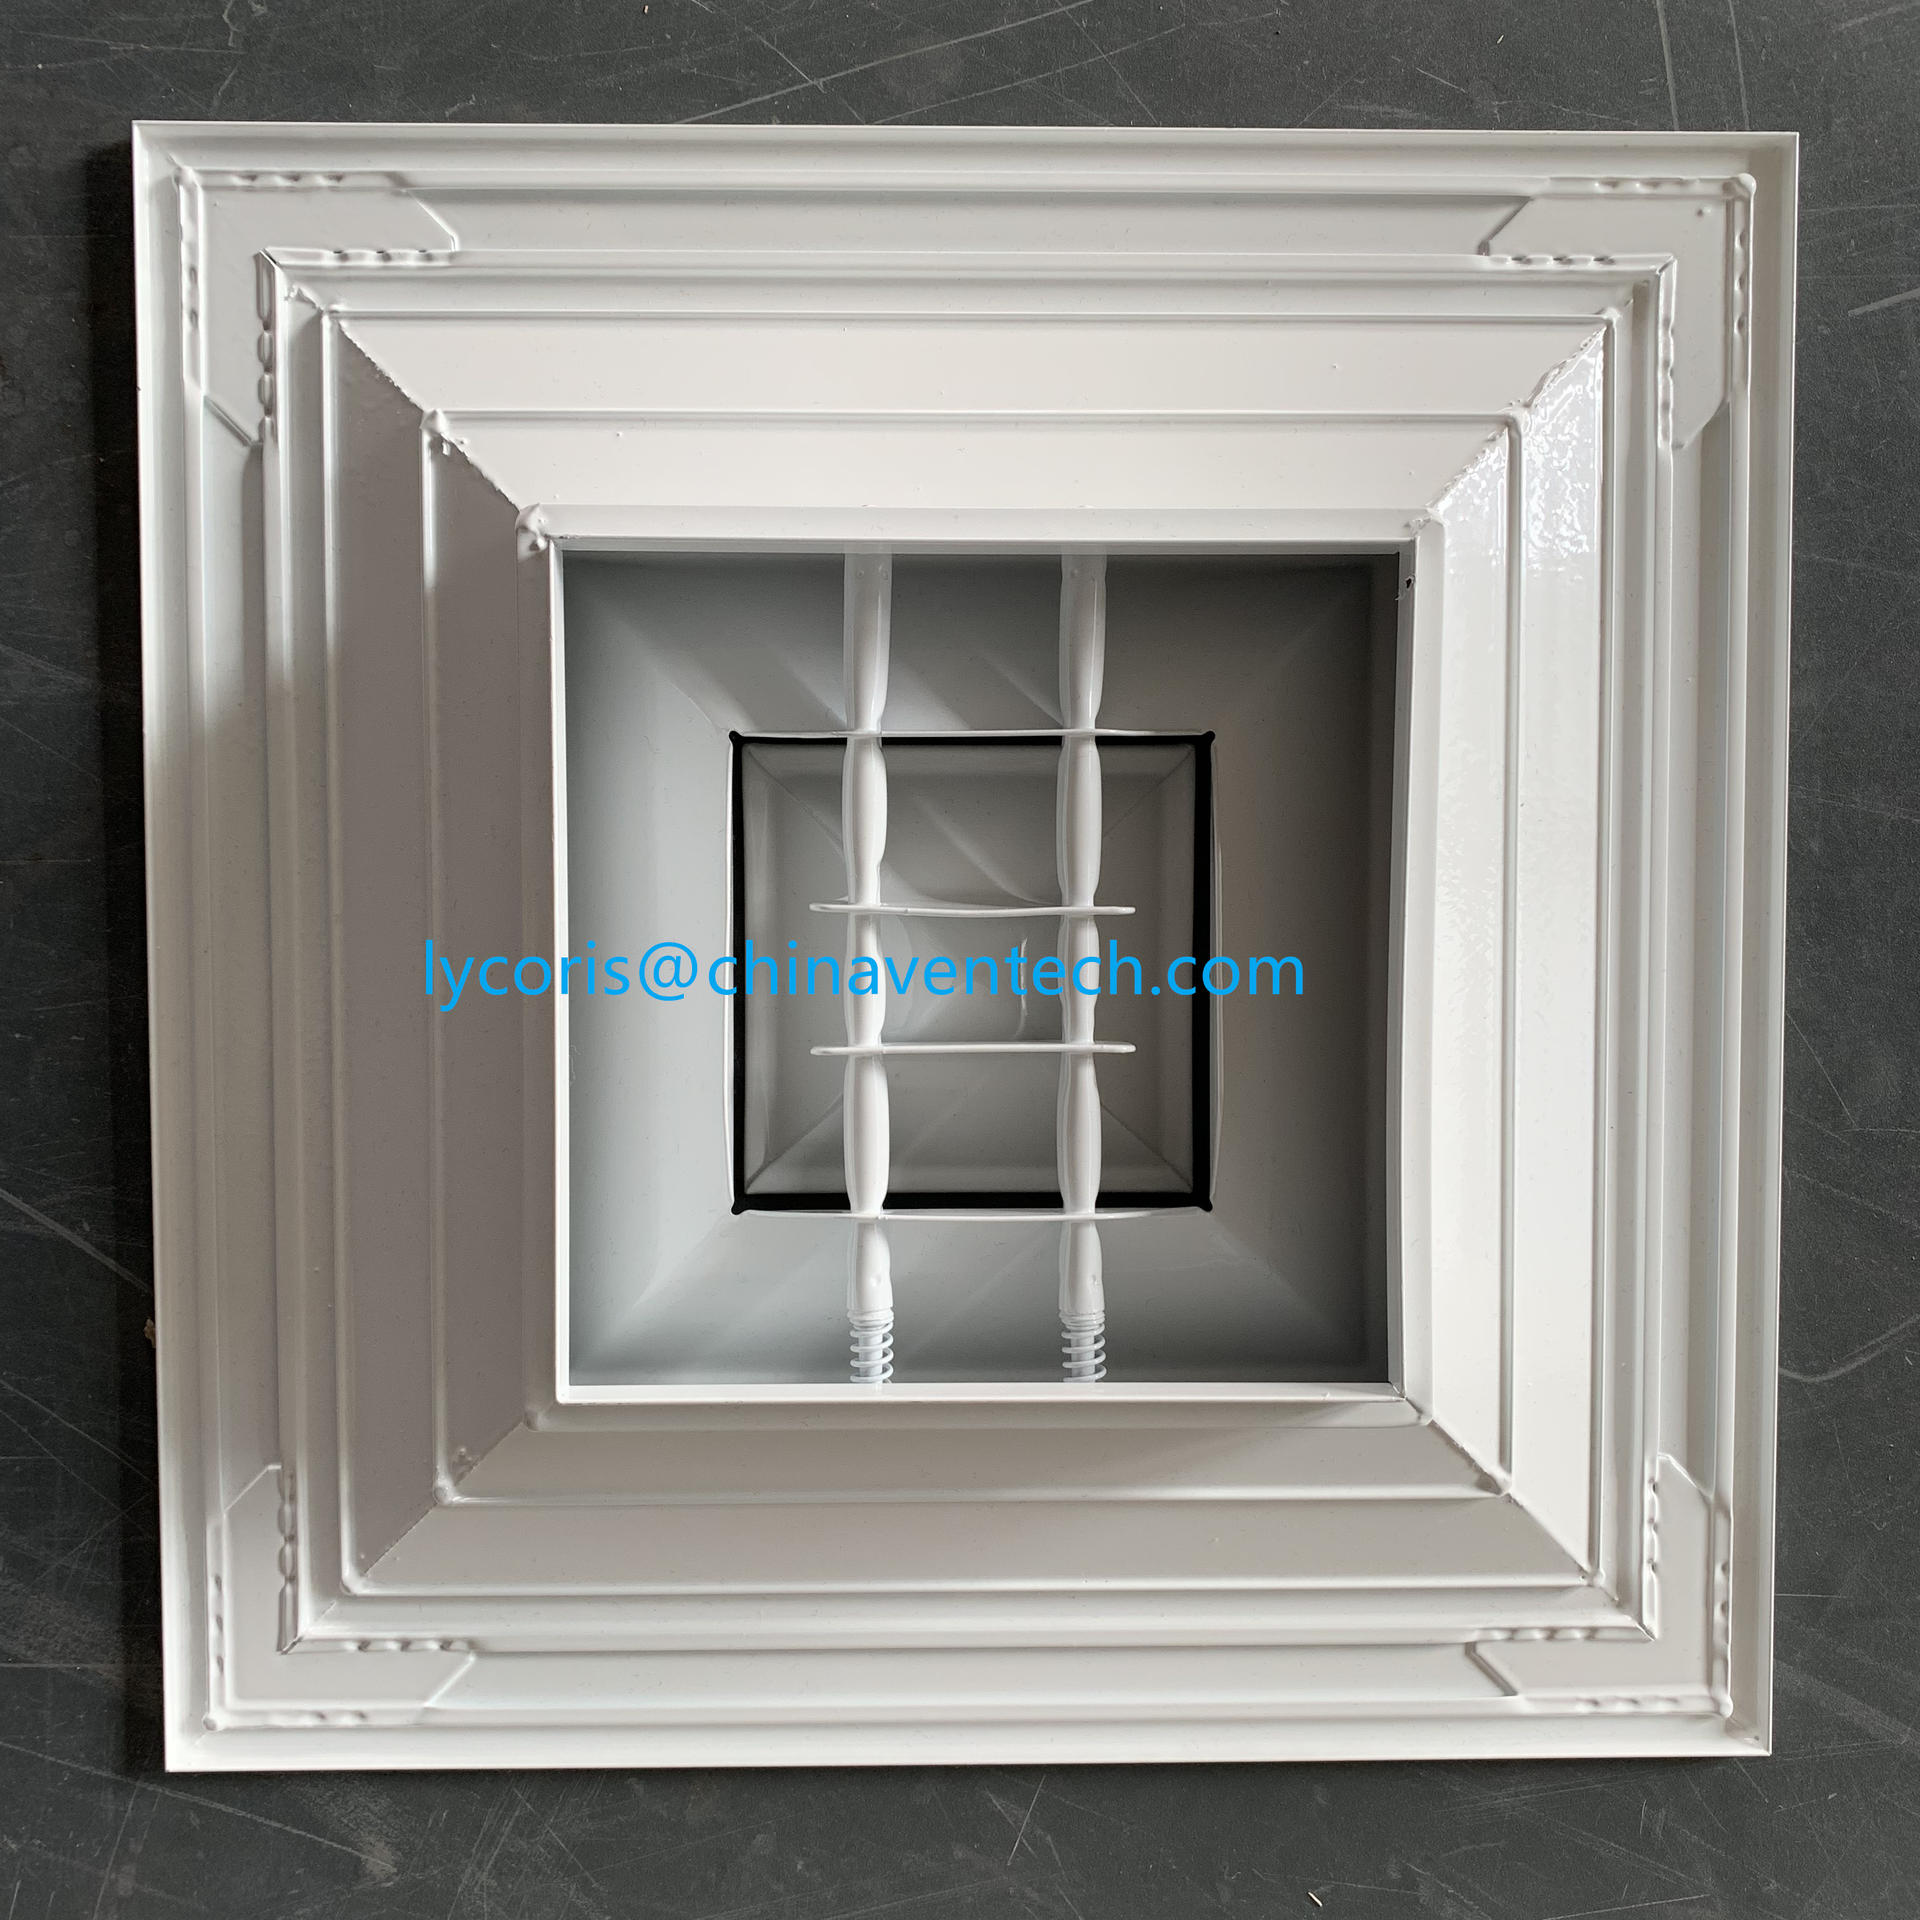 High Quality Aluminum Diffuser Removable Core Ceiling Square Diffuser